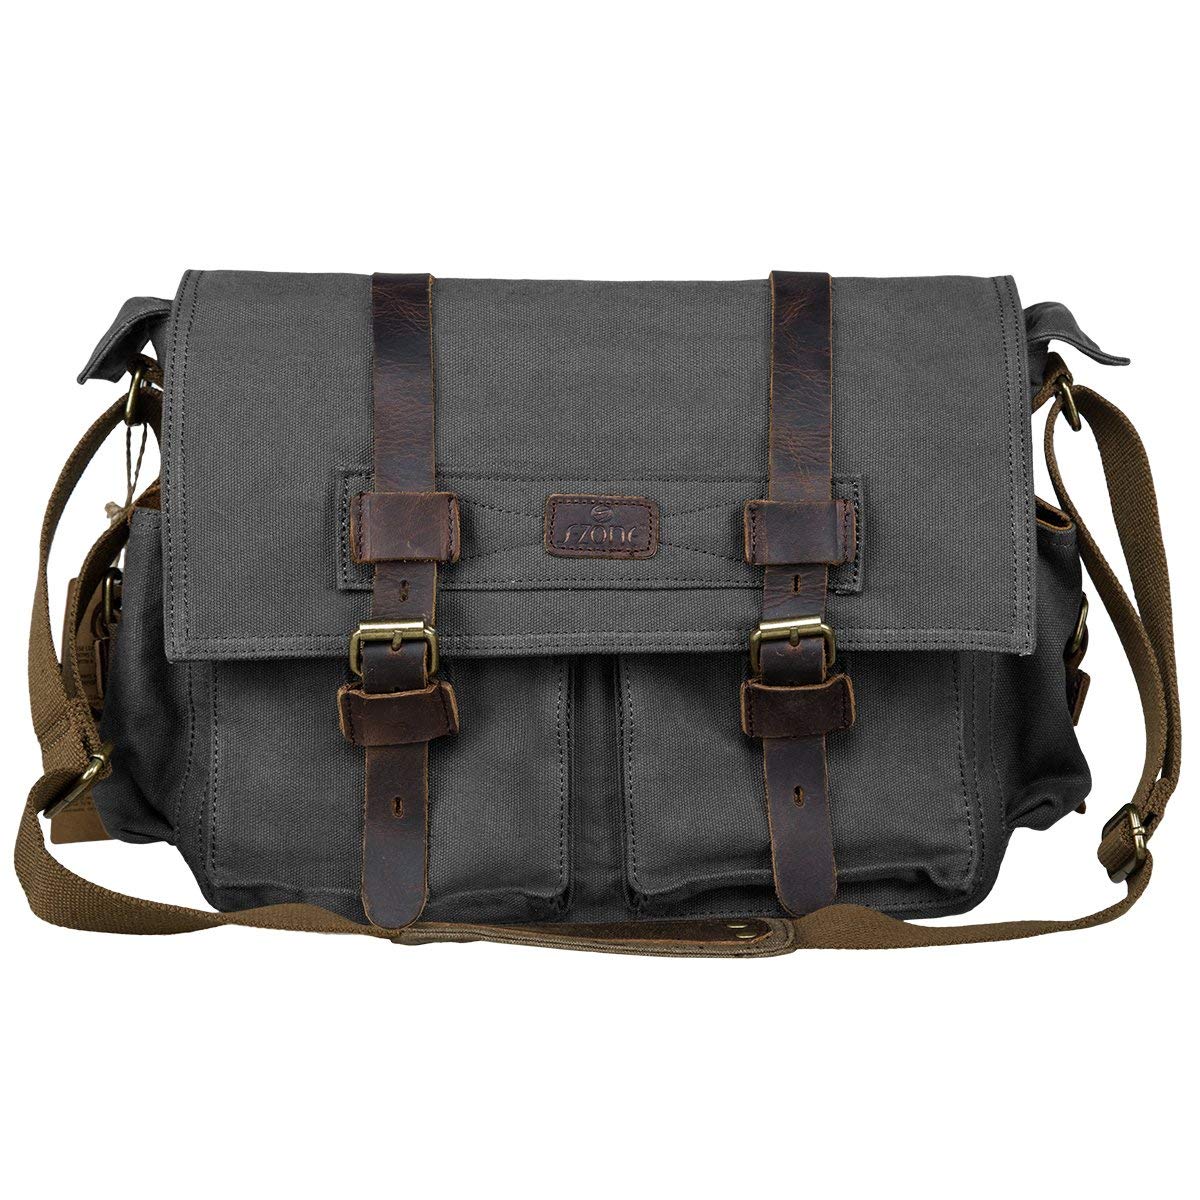 best camera bags, mens camera bag, best professional camera bags review, camera gear bag, camera bags for professional photographers, recommended camera bags, leather camera bag, top camera bags 2017, best over the shoulder camera bag, modern camera bag, top camera bags, best dslr camera bag for travel 2017, best dslr bag, canvas camera bag, large camera bags, best rangefinder camera bag, dslr bag review, best small camera bag, camera bag 2017, camera and laptop bag, laptop camera bag, dlsr bag, best camera case, best camera bag in the world, camera bag dslr 3 lenses, best camera messenger bag 2017, pro dslr camera bag, cool camera bags, best dslr camera bag for travel, camera bag reviews the complete list, dslr camera bag, best mirrorless camera bag, small dslr camera bag, travel camera bag, mirrorless camera bag, photo bag, dslr camera case, popular camera bags, best messenger style camera bag, camera messenger bag, camera bag brands, best dslr camera bag, best camera shoulder bag, small camera bag, best camera bags for travel, waterproof camera bag, photography bag, best camera bag 2016, camera bag reviews, best camera bags 2017, best camera messenger bag, herschel camera bag, professional camera bags, best camera bag, camera bag